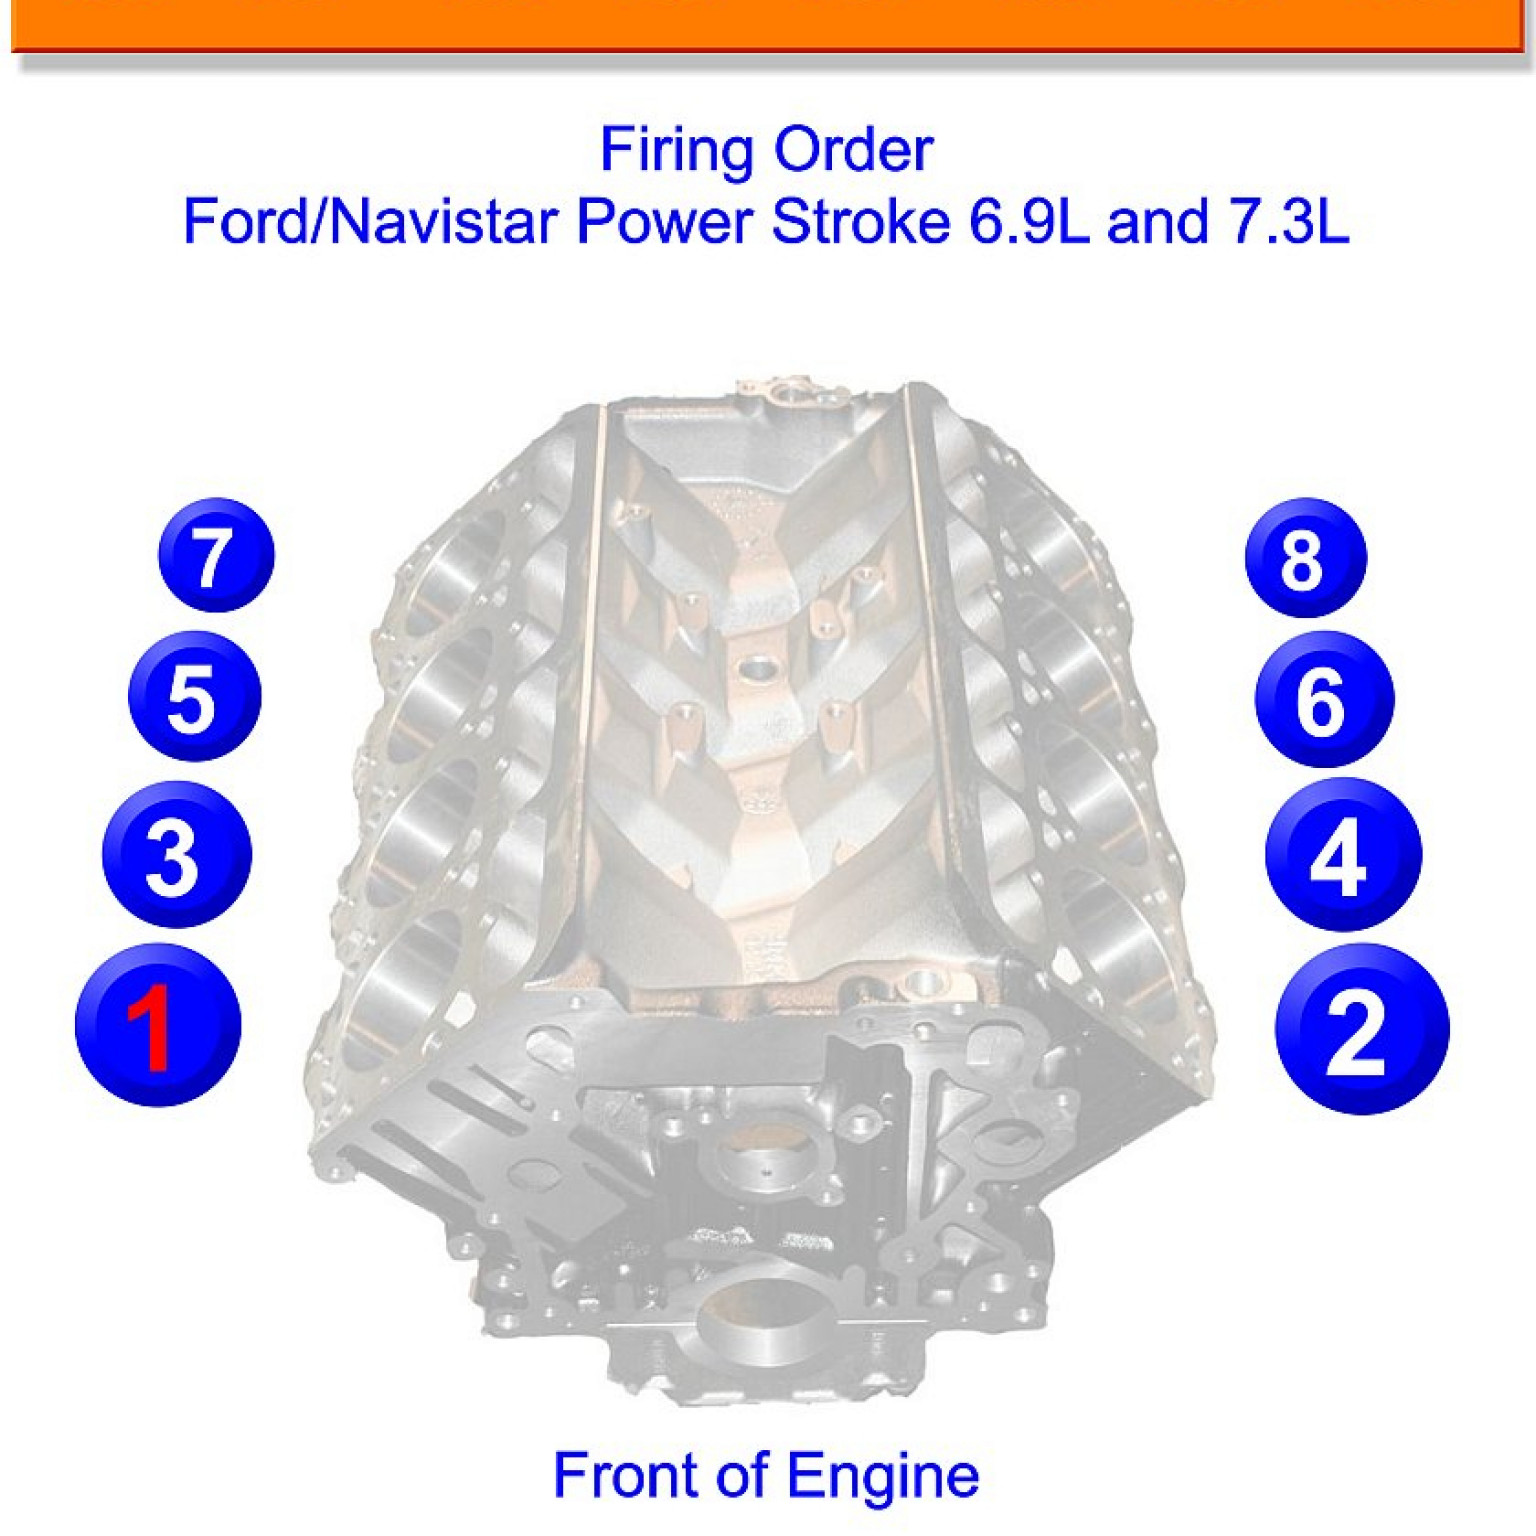 2004 Ford F250 60 Firing Order Wiring And Printable